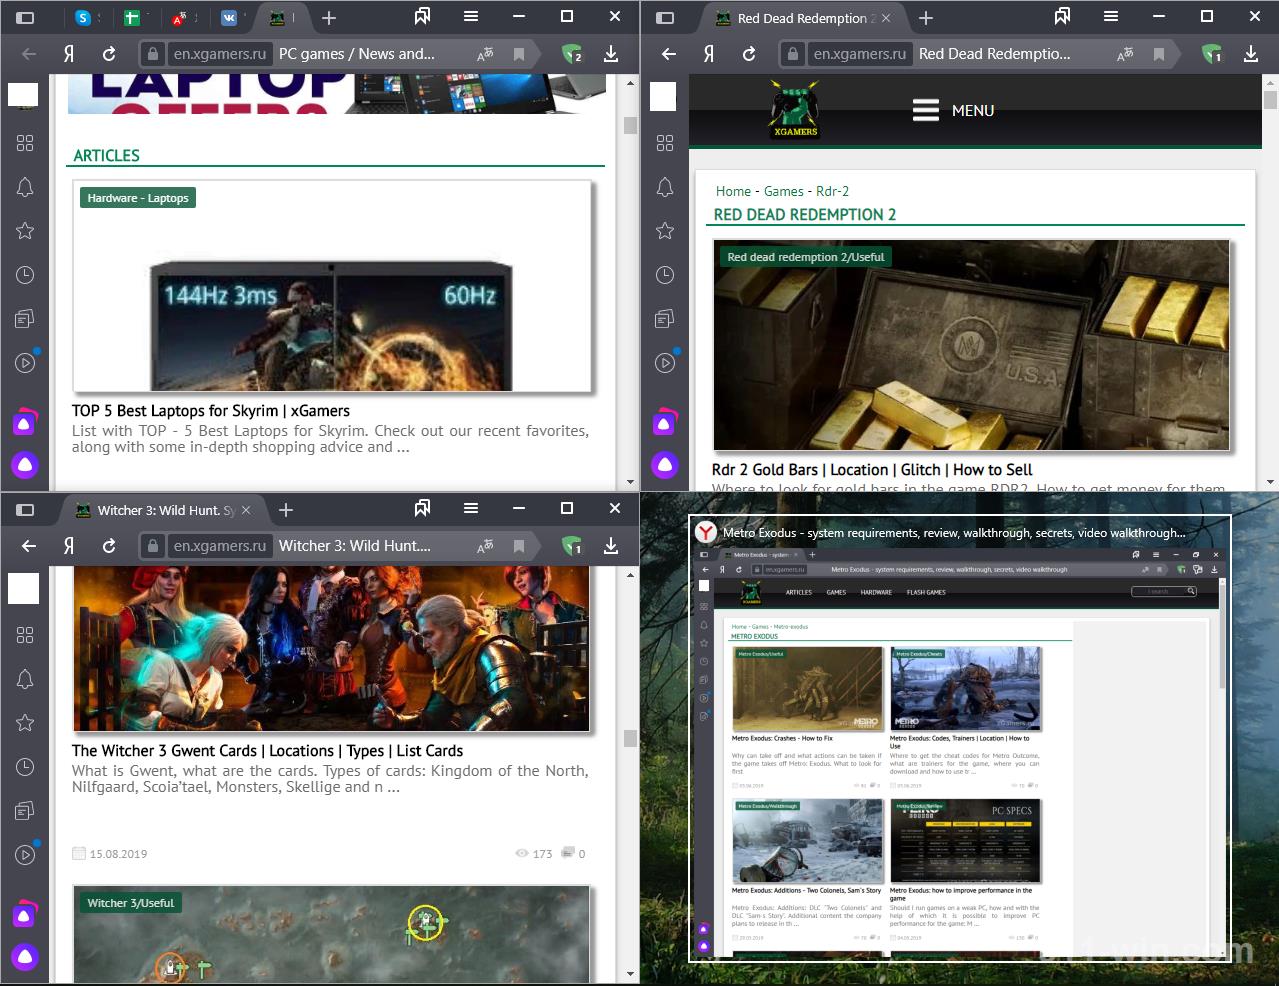 An example of what a split screen looks like in 4 parts in Windows 10